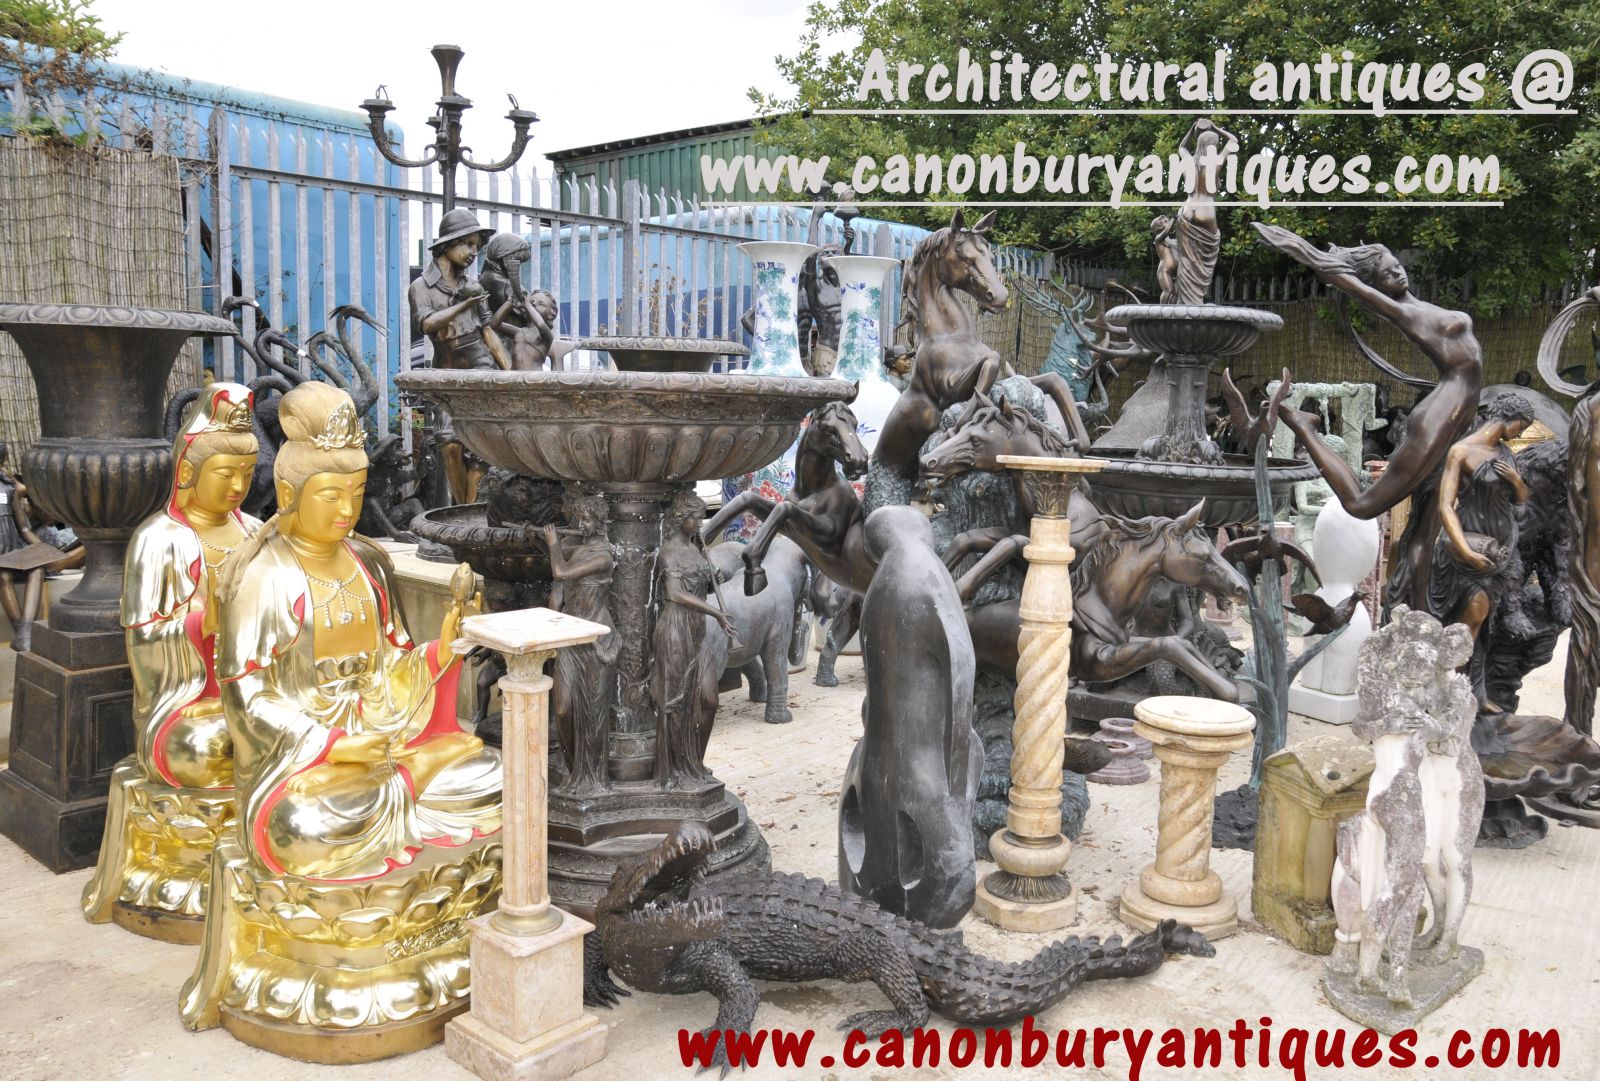 Canonbury Antiques architectural antiques and bronze section